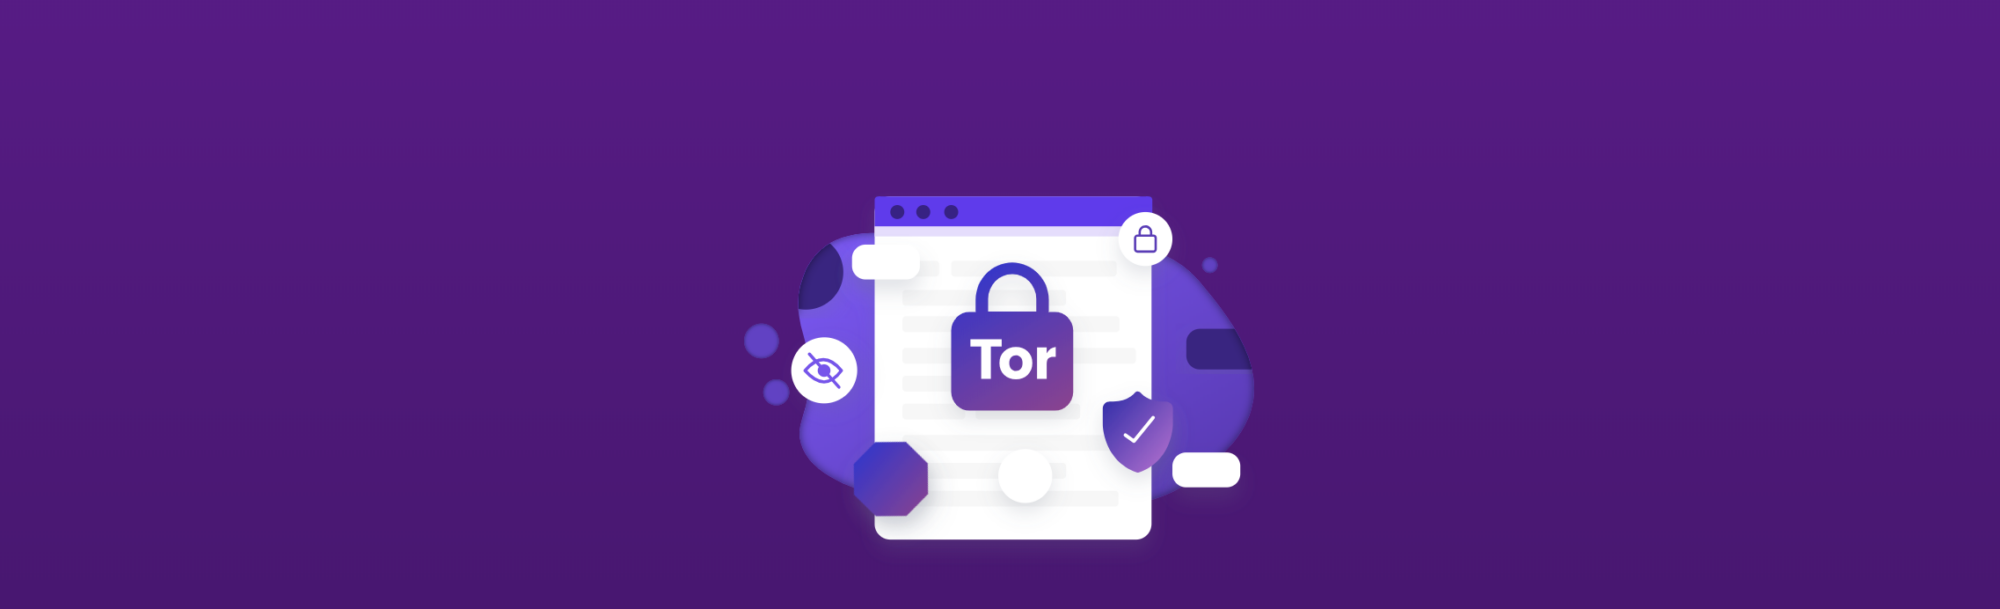 How to Anonymously Access Content on the Internet with Tor 1